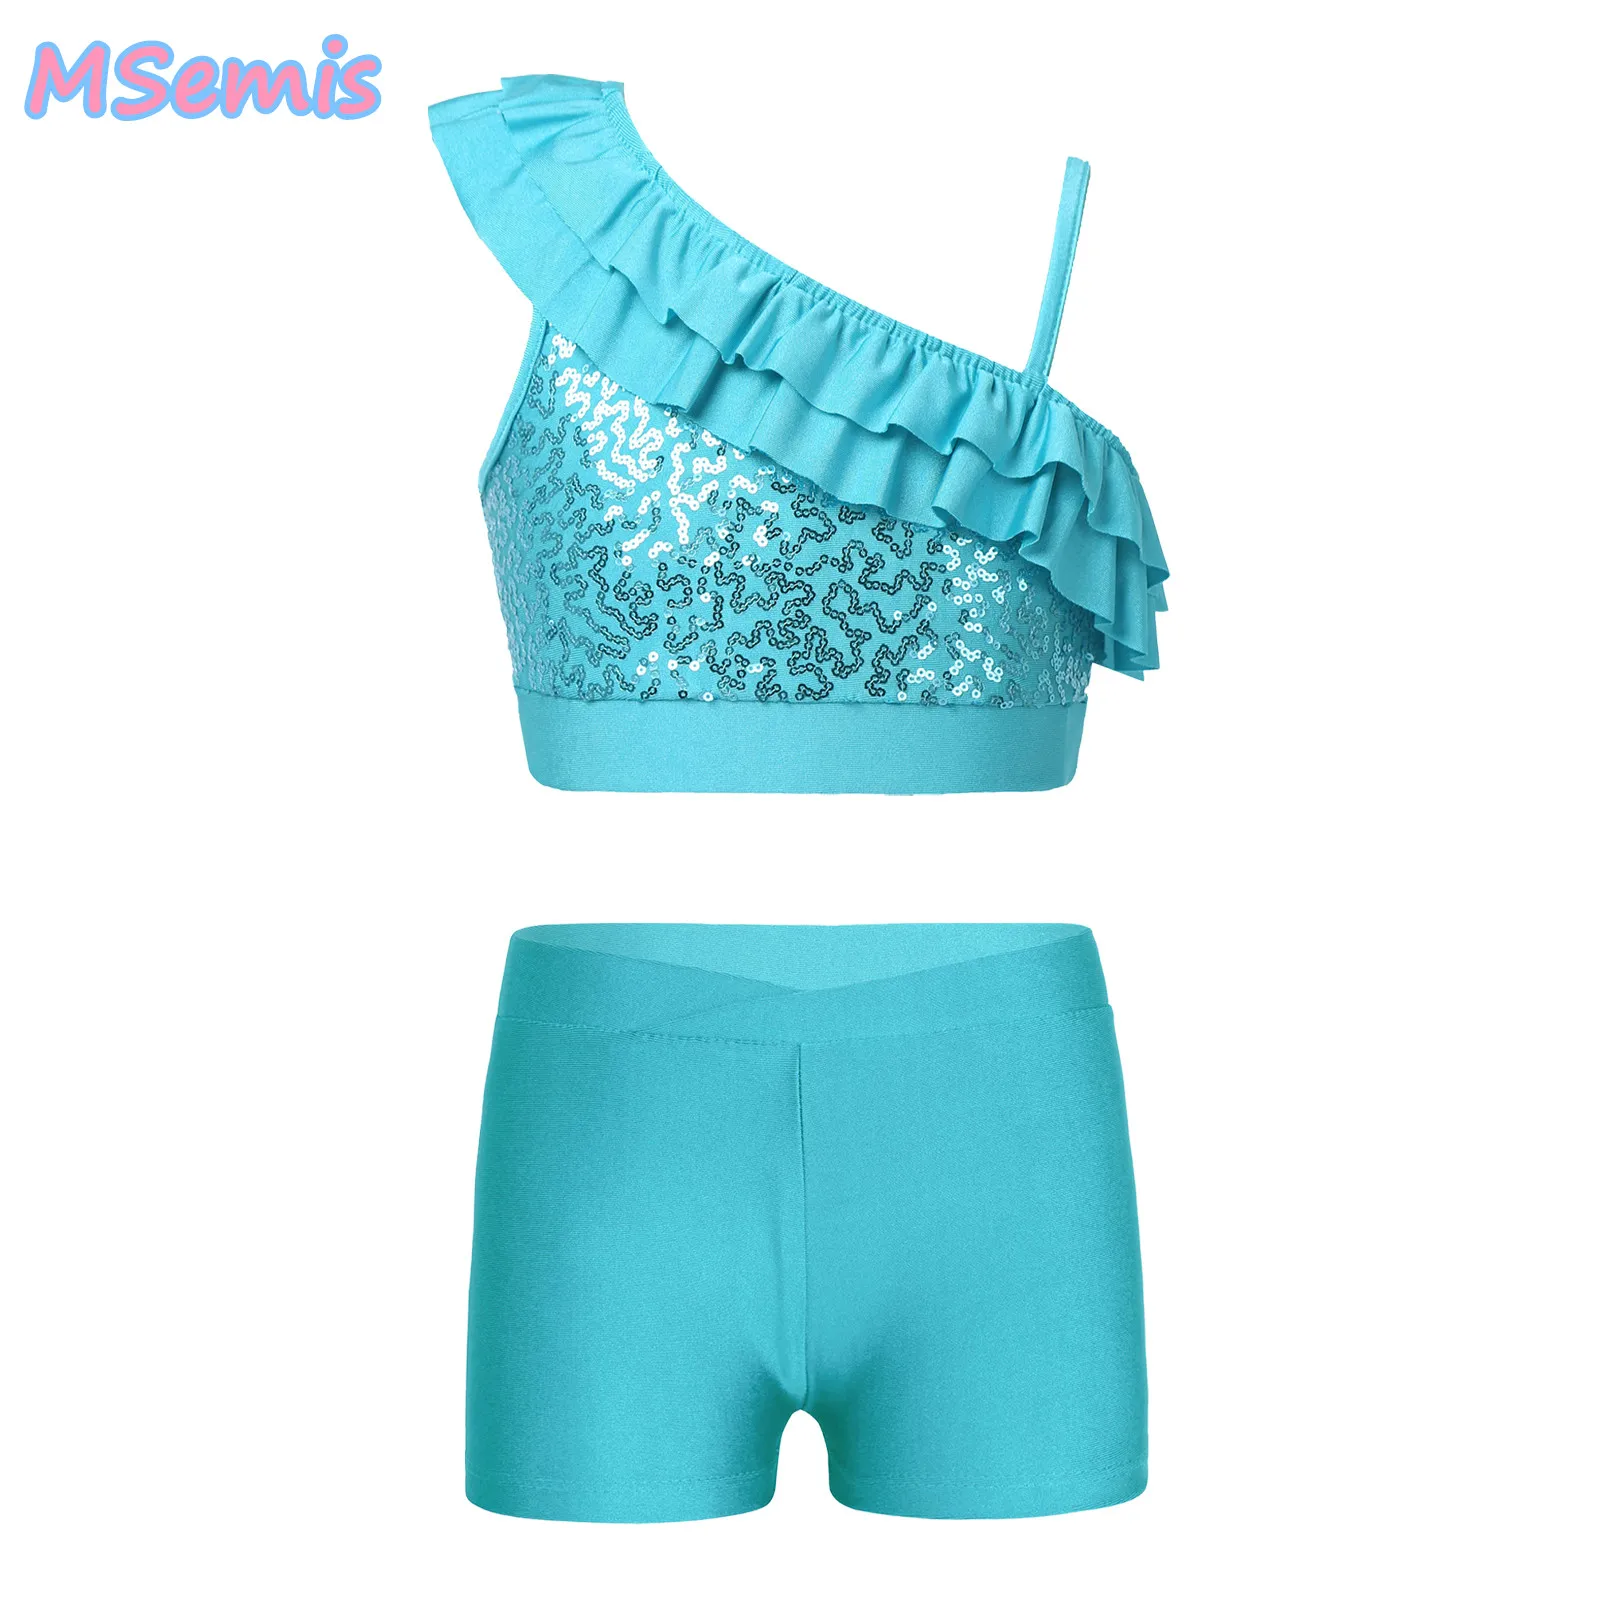 

Kid Girls Asymmetrical Ruffle Dance Set Sequin Crop Top with Shorts for Dance Gymnastics Performance Competition